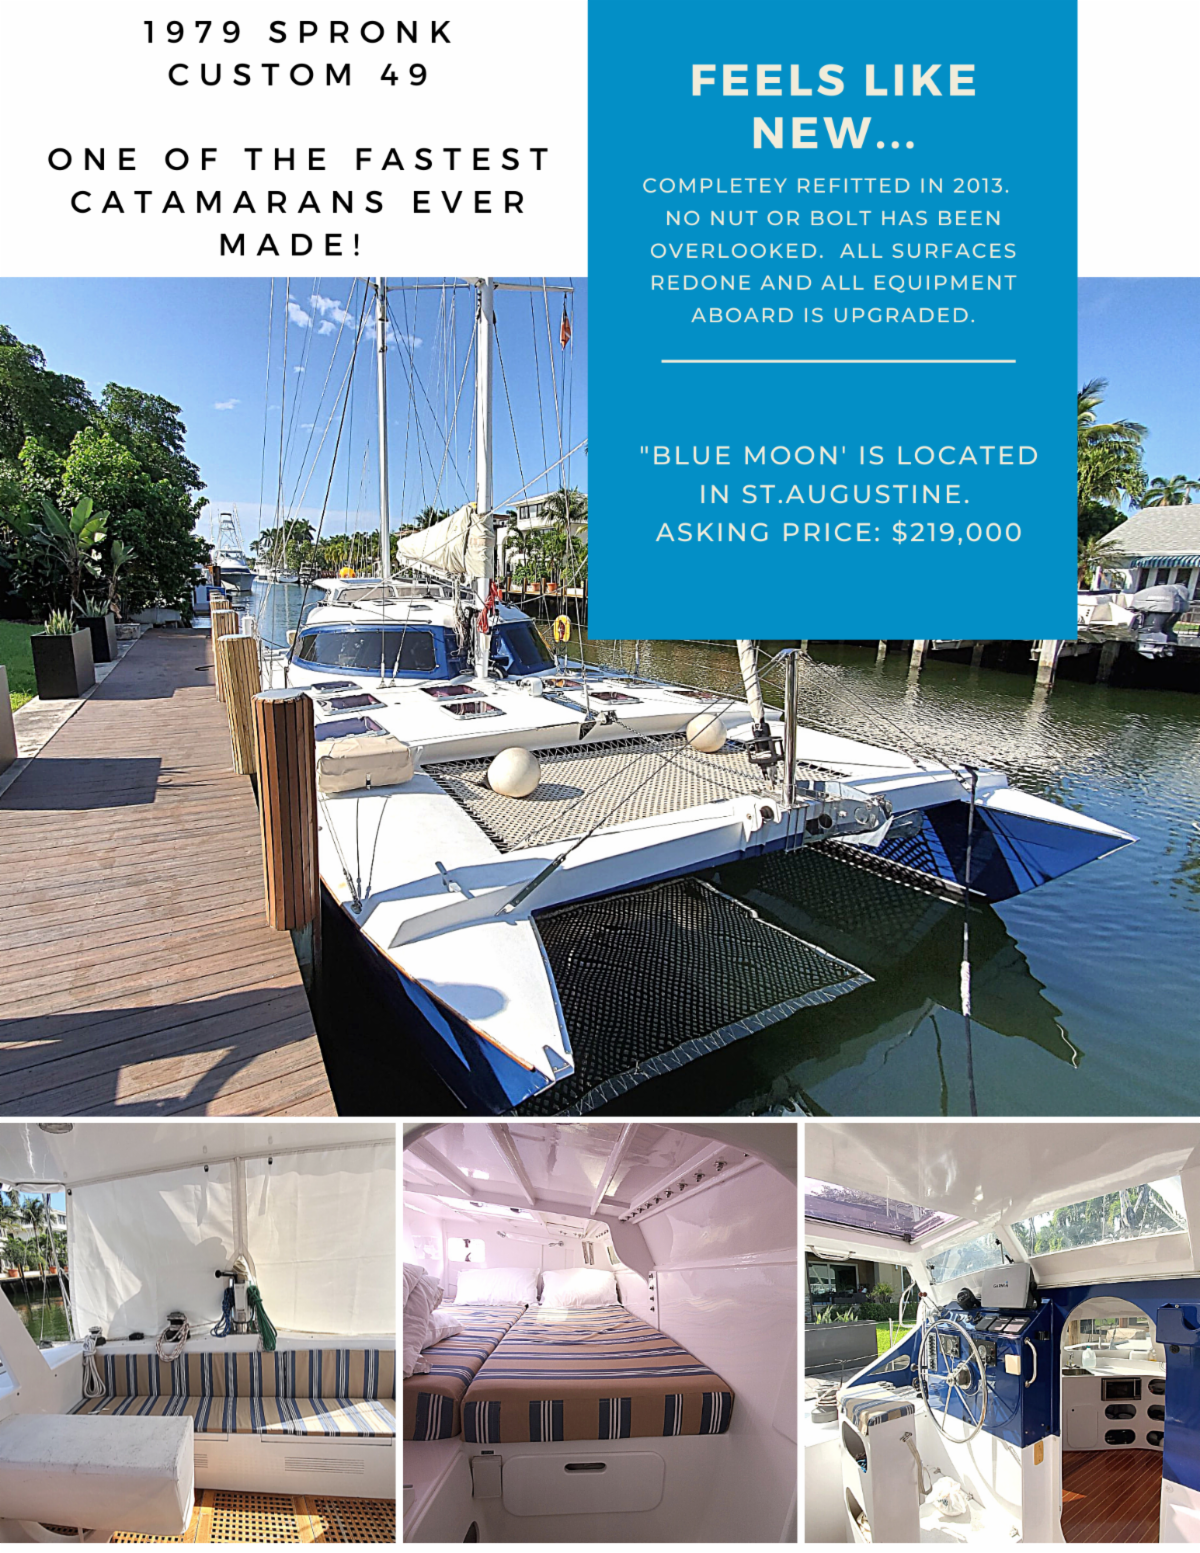 Refitted 1979 Custom 49 SPRONK For Sale - Nothing Untouched on this Fast Catamaran!